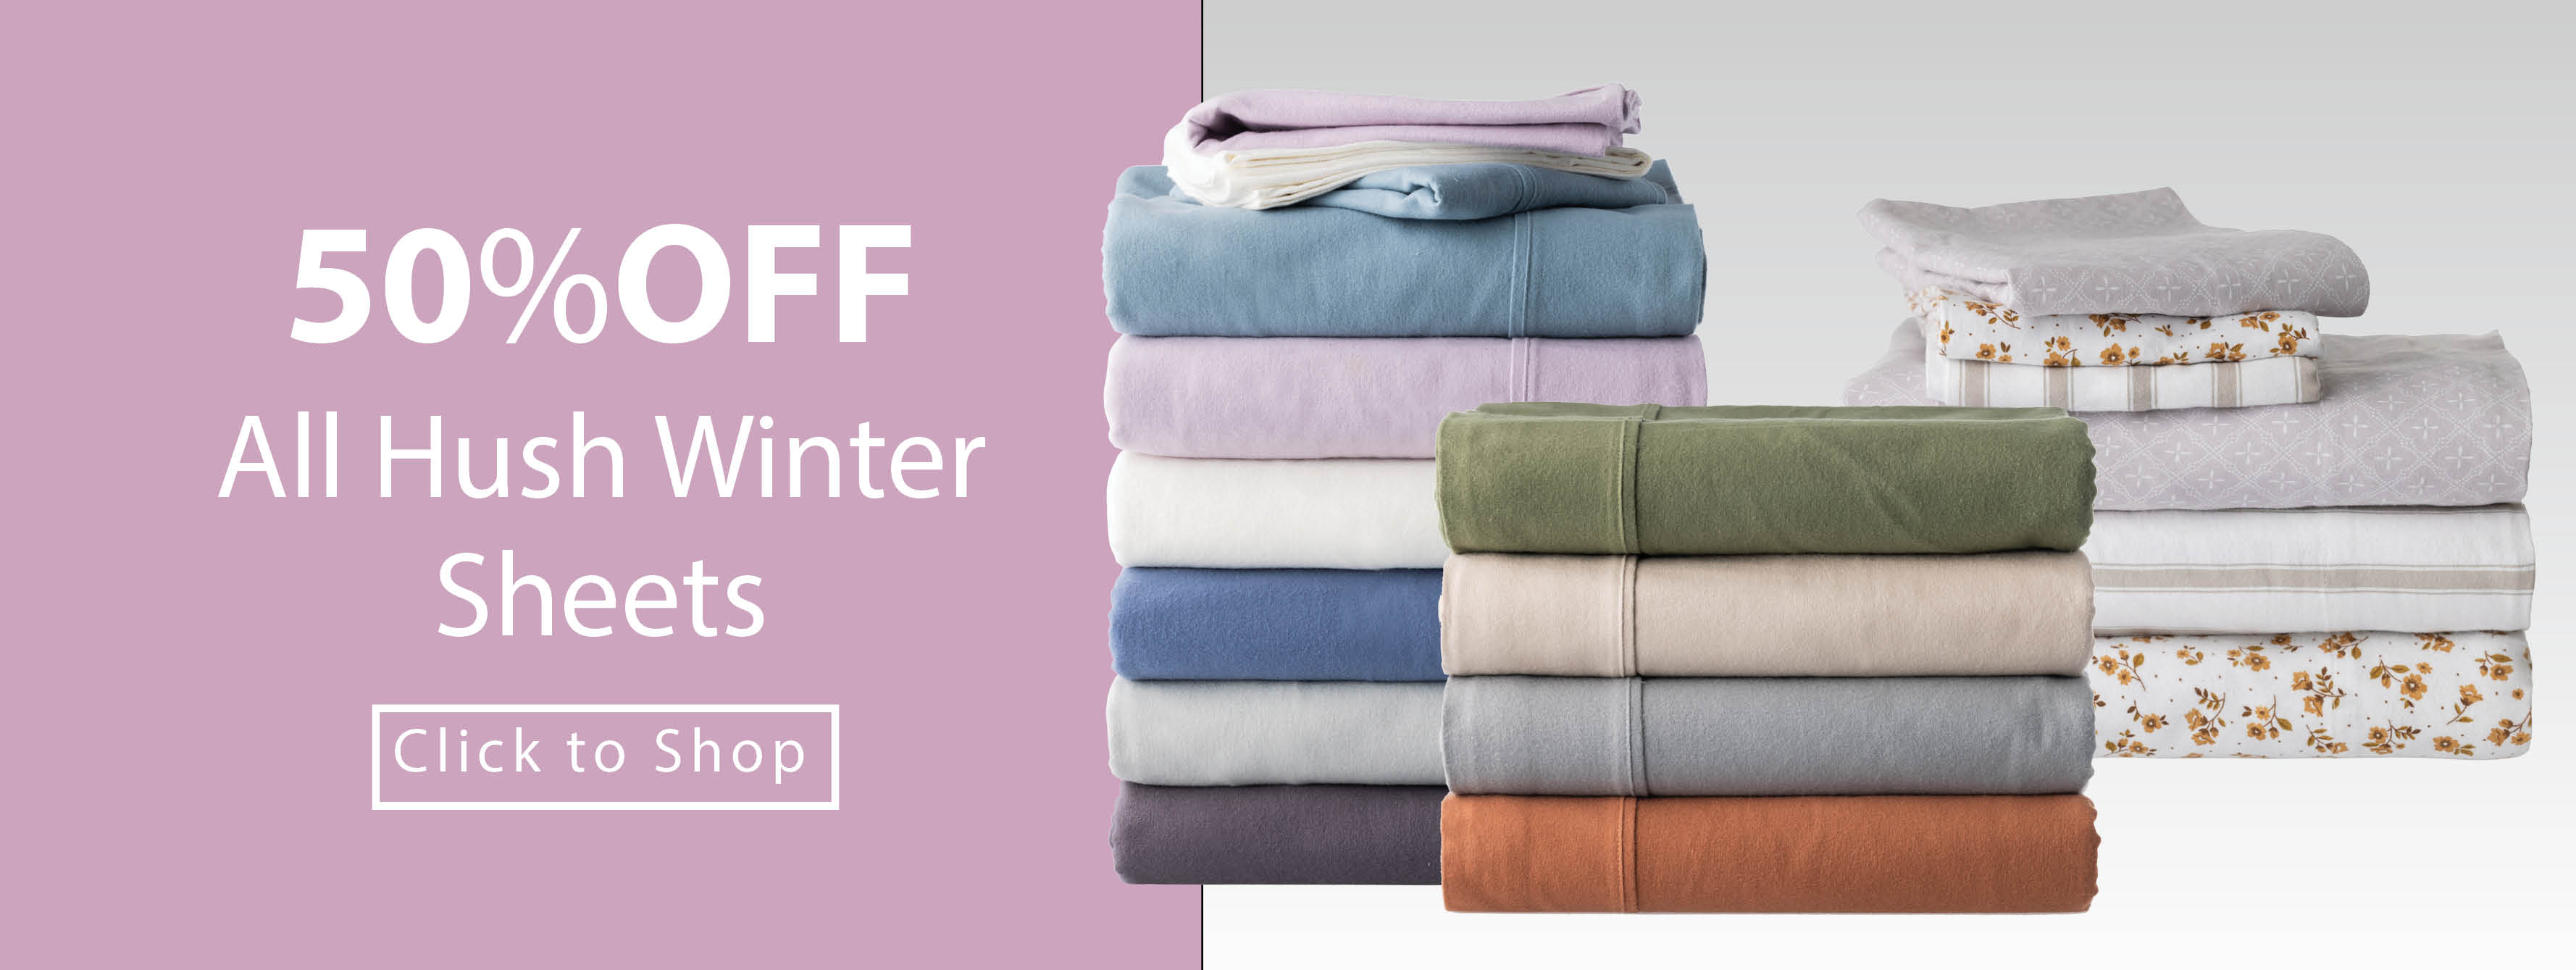 50%Off Sheets 